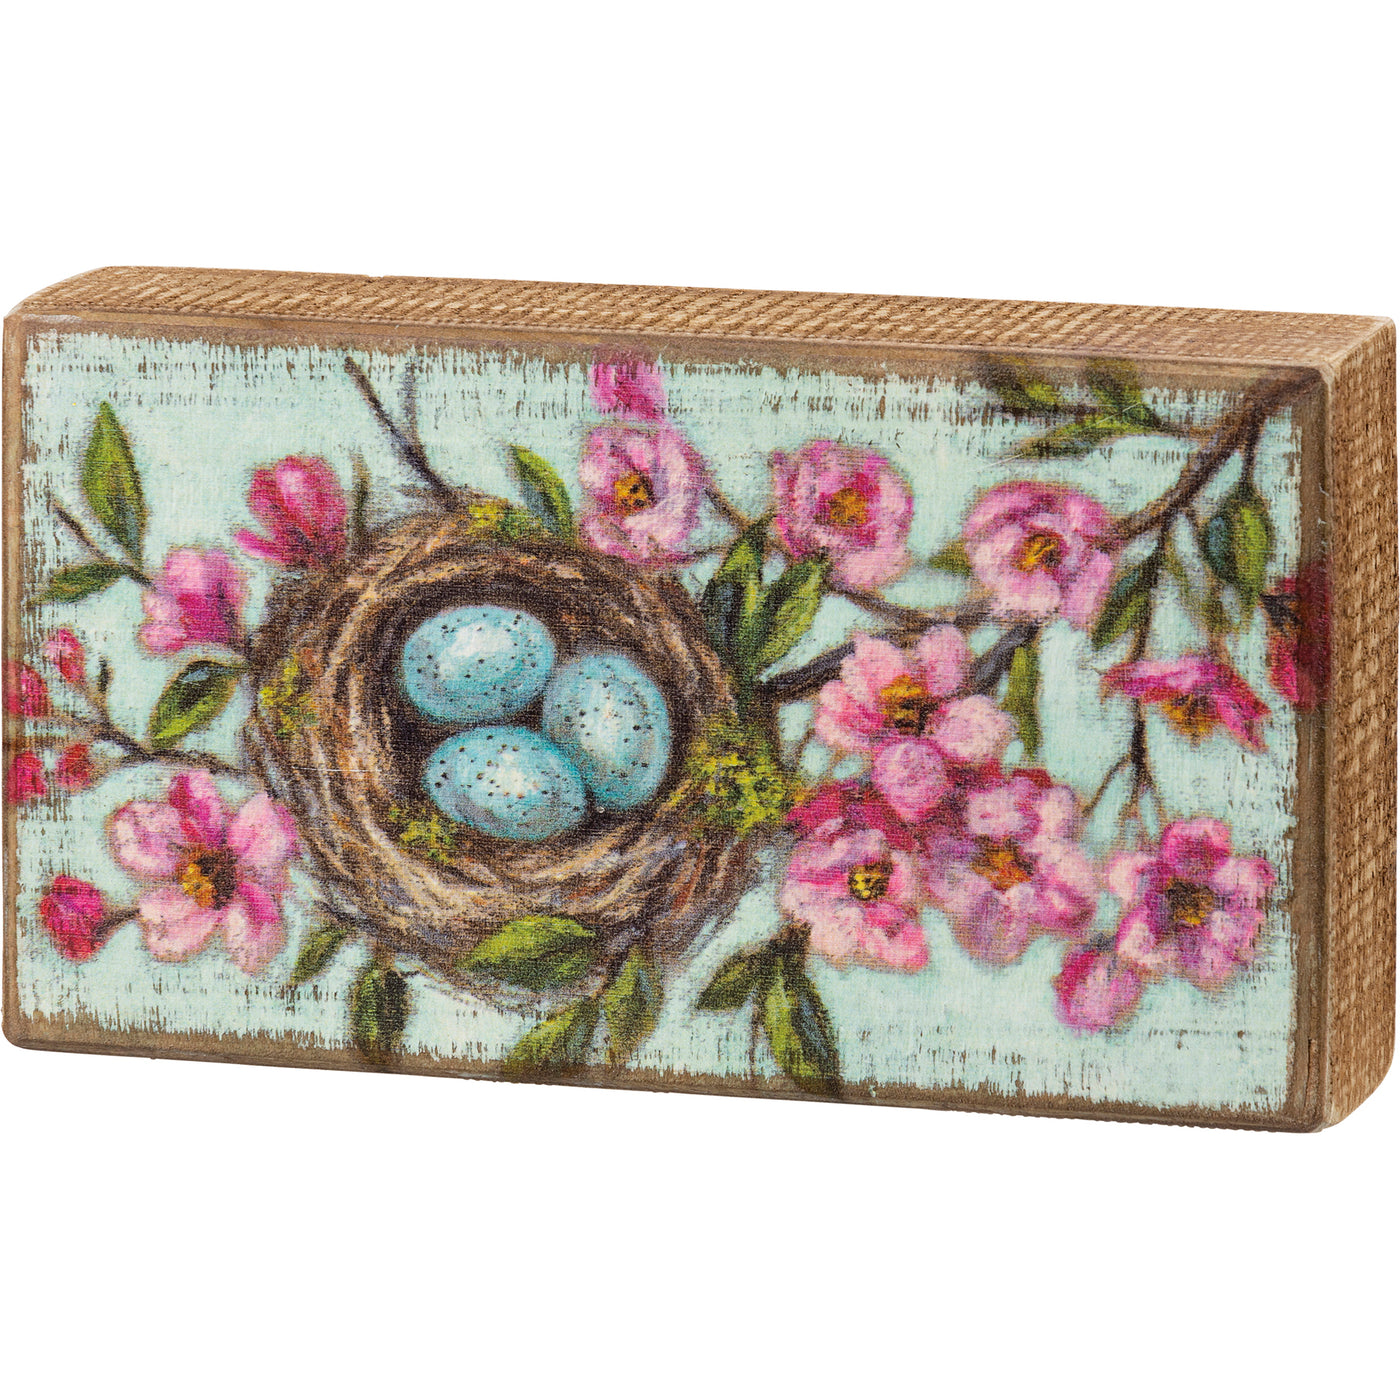 Surprise Me Sale 🤭 Robin's Nest in Flowering Tree Wooden Box Sign